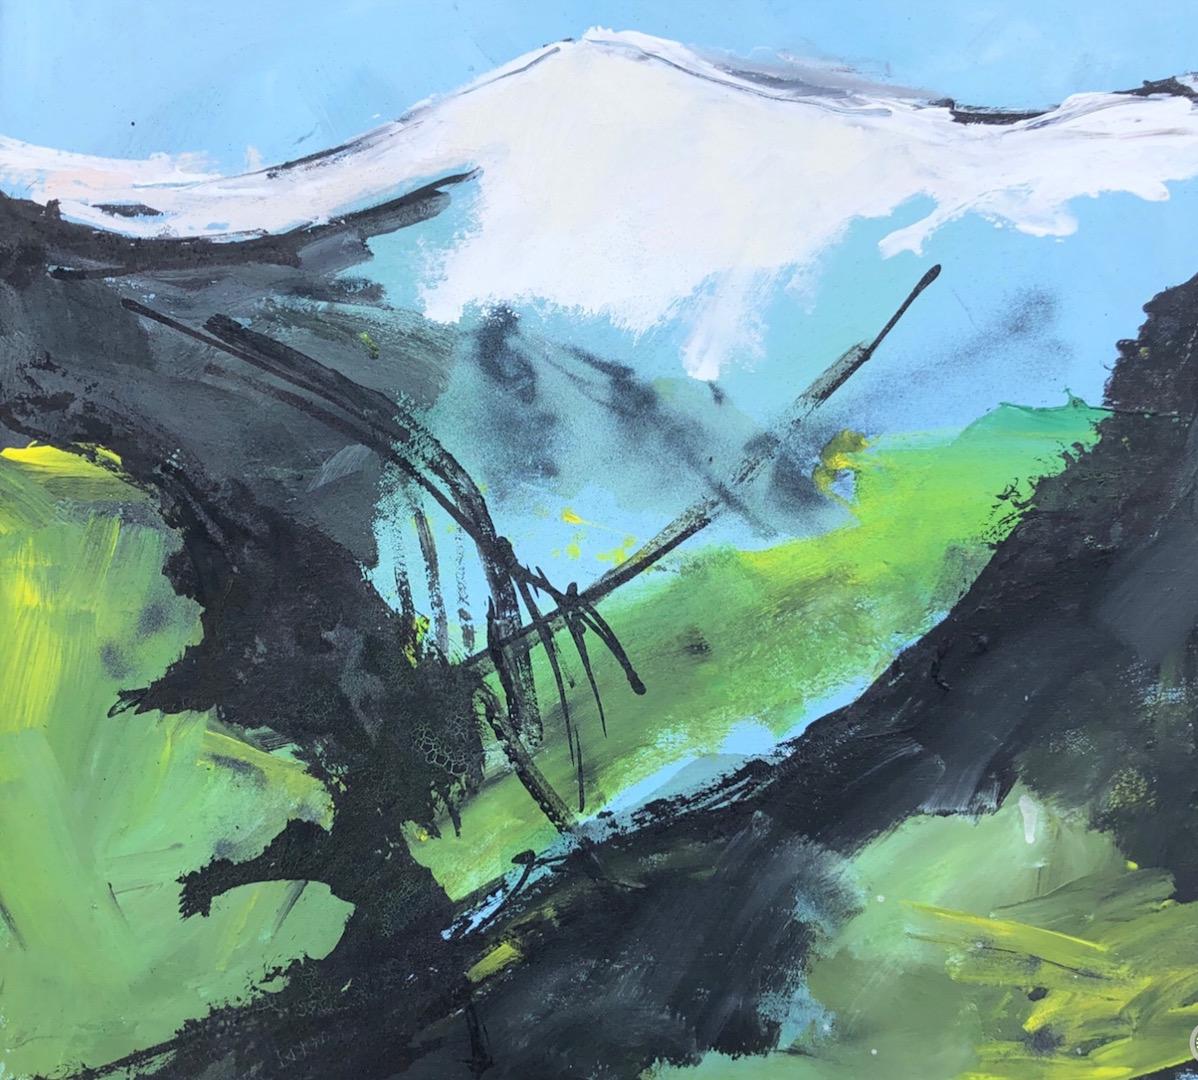 Maggie LaPorte Banks, Pen-y-fan no. 4, Abstract Art, Affordable Art